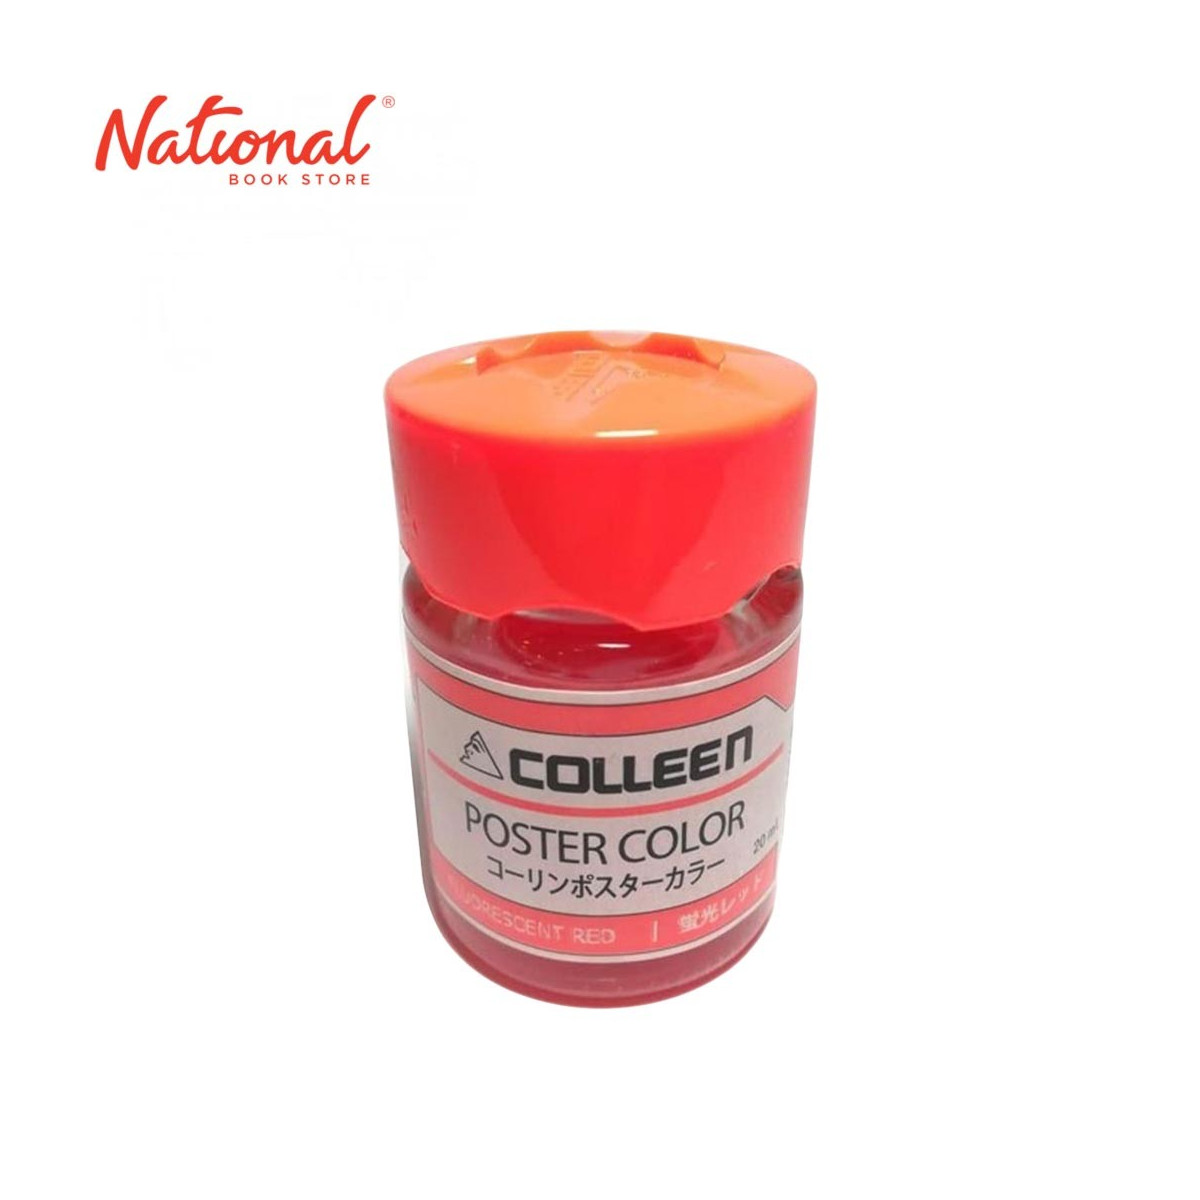 COLLEEN POSTER COLOR 12001 20ML, 12002 RED